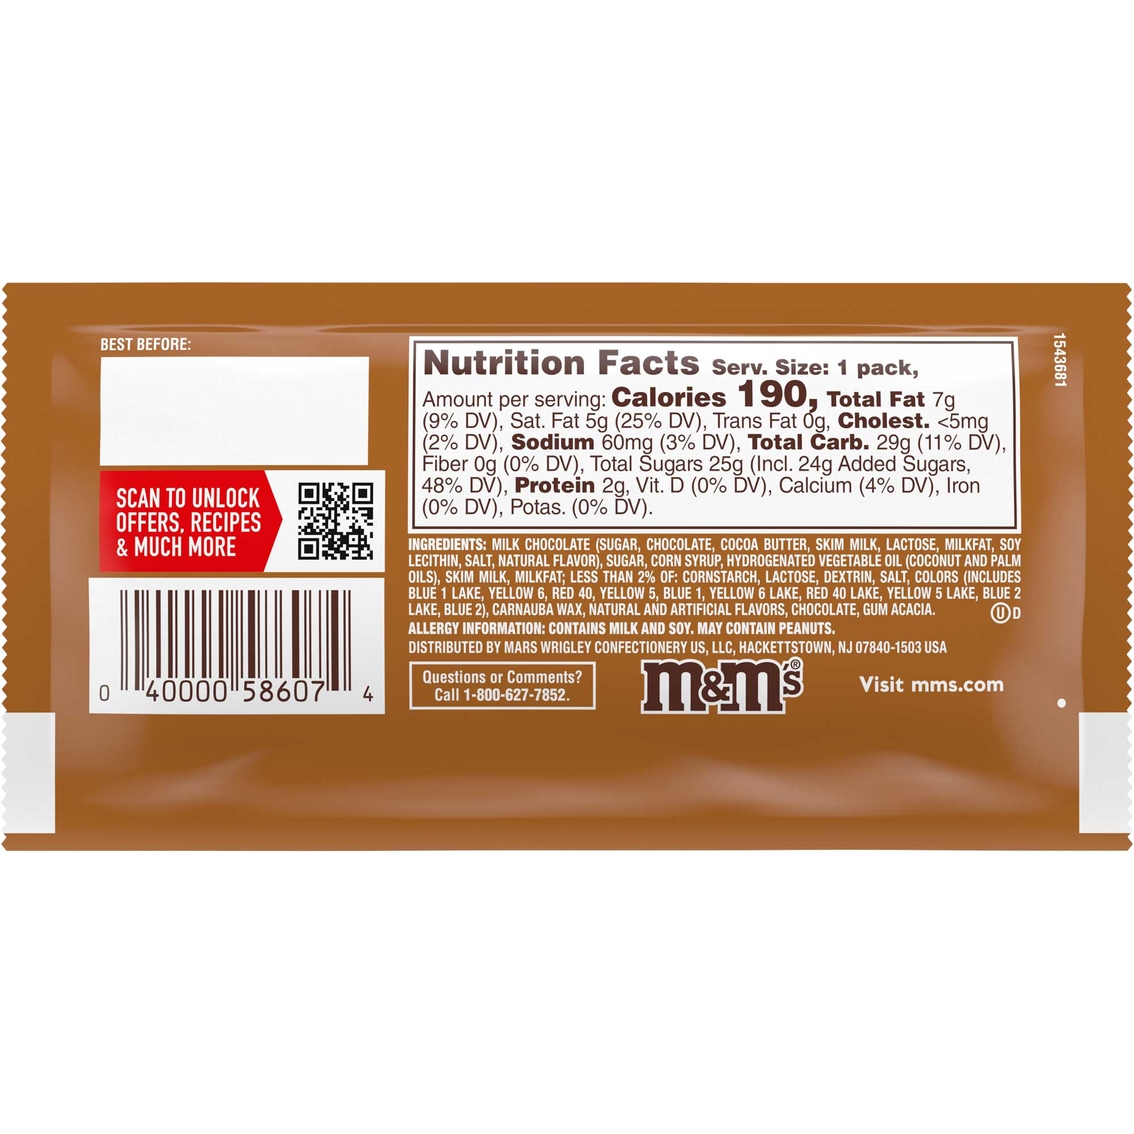 M&M's Caramel Cold Brew Milk Chocolate Candy, 1.41 oz. - Image 2 of 2